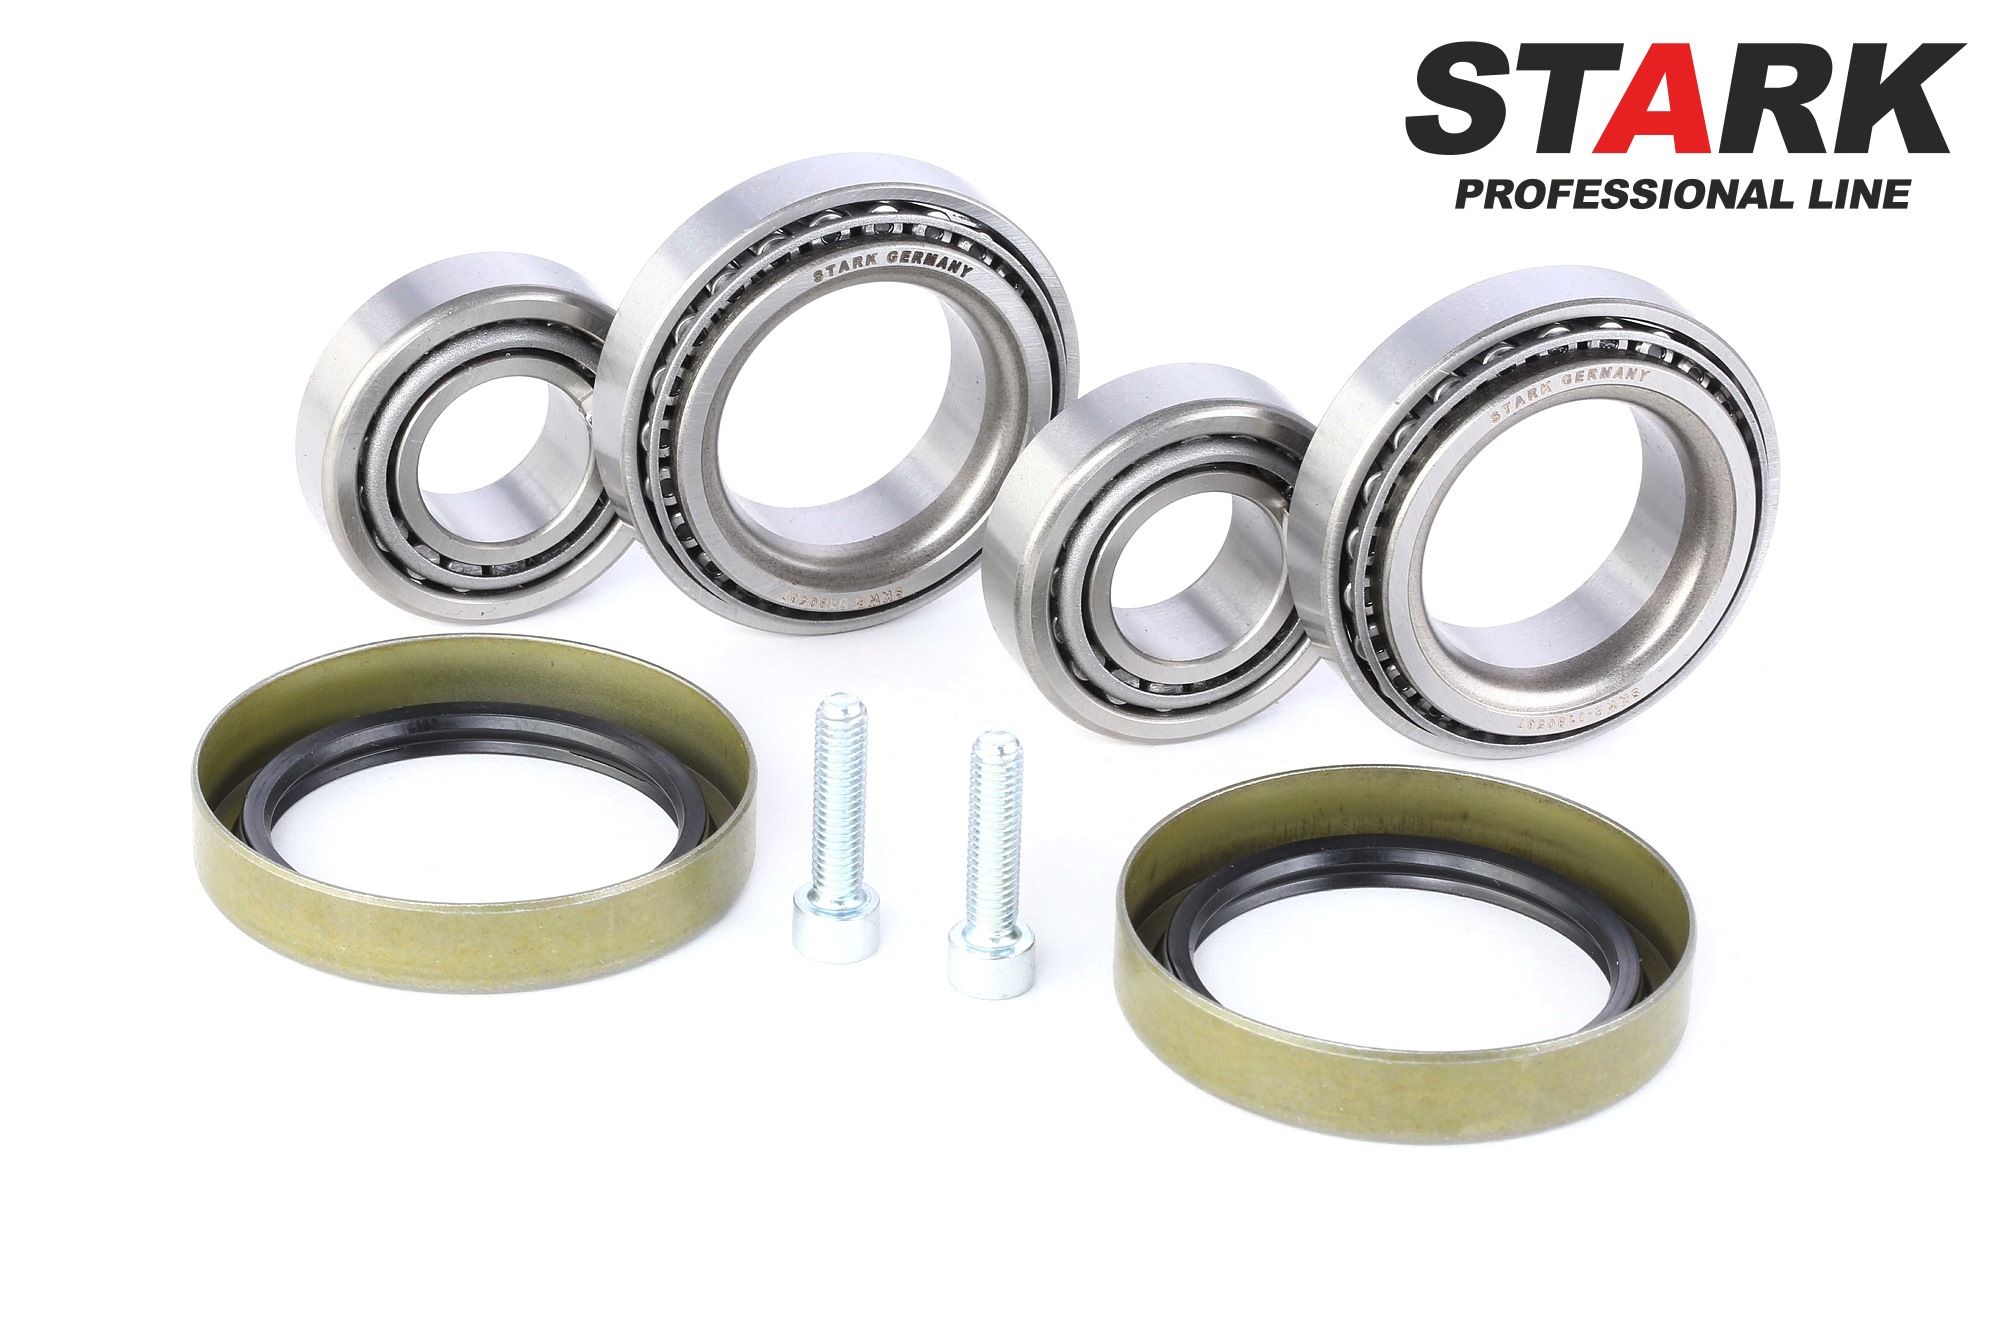 Wheel bearing STARK Front axle both sides, Contains two wheel bearing sets, 45,2, 60 mm - SKWB-0181188